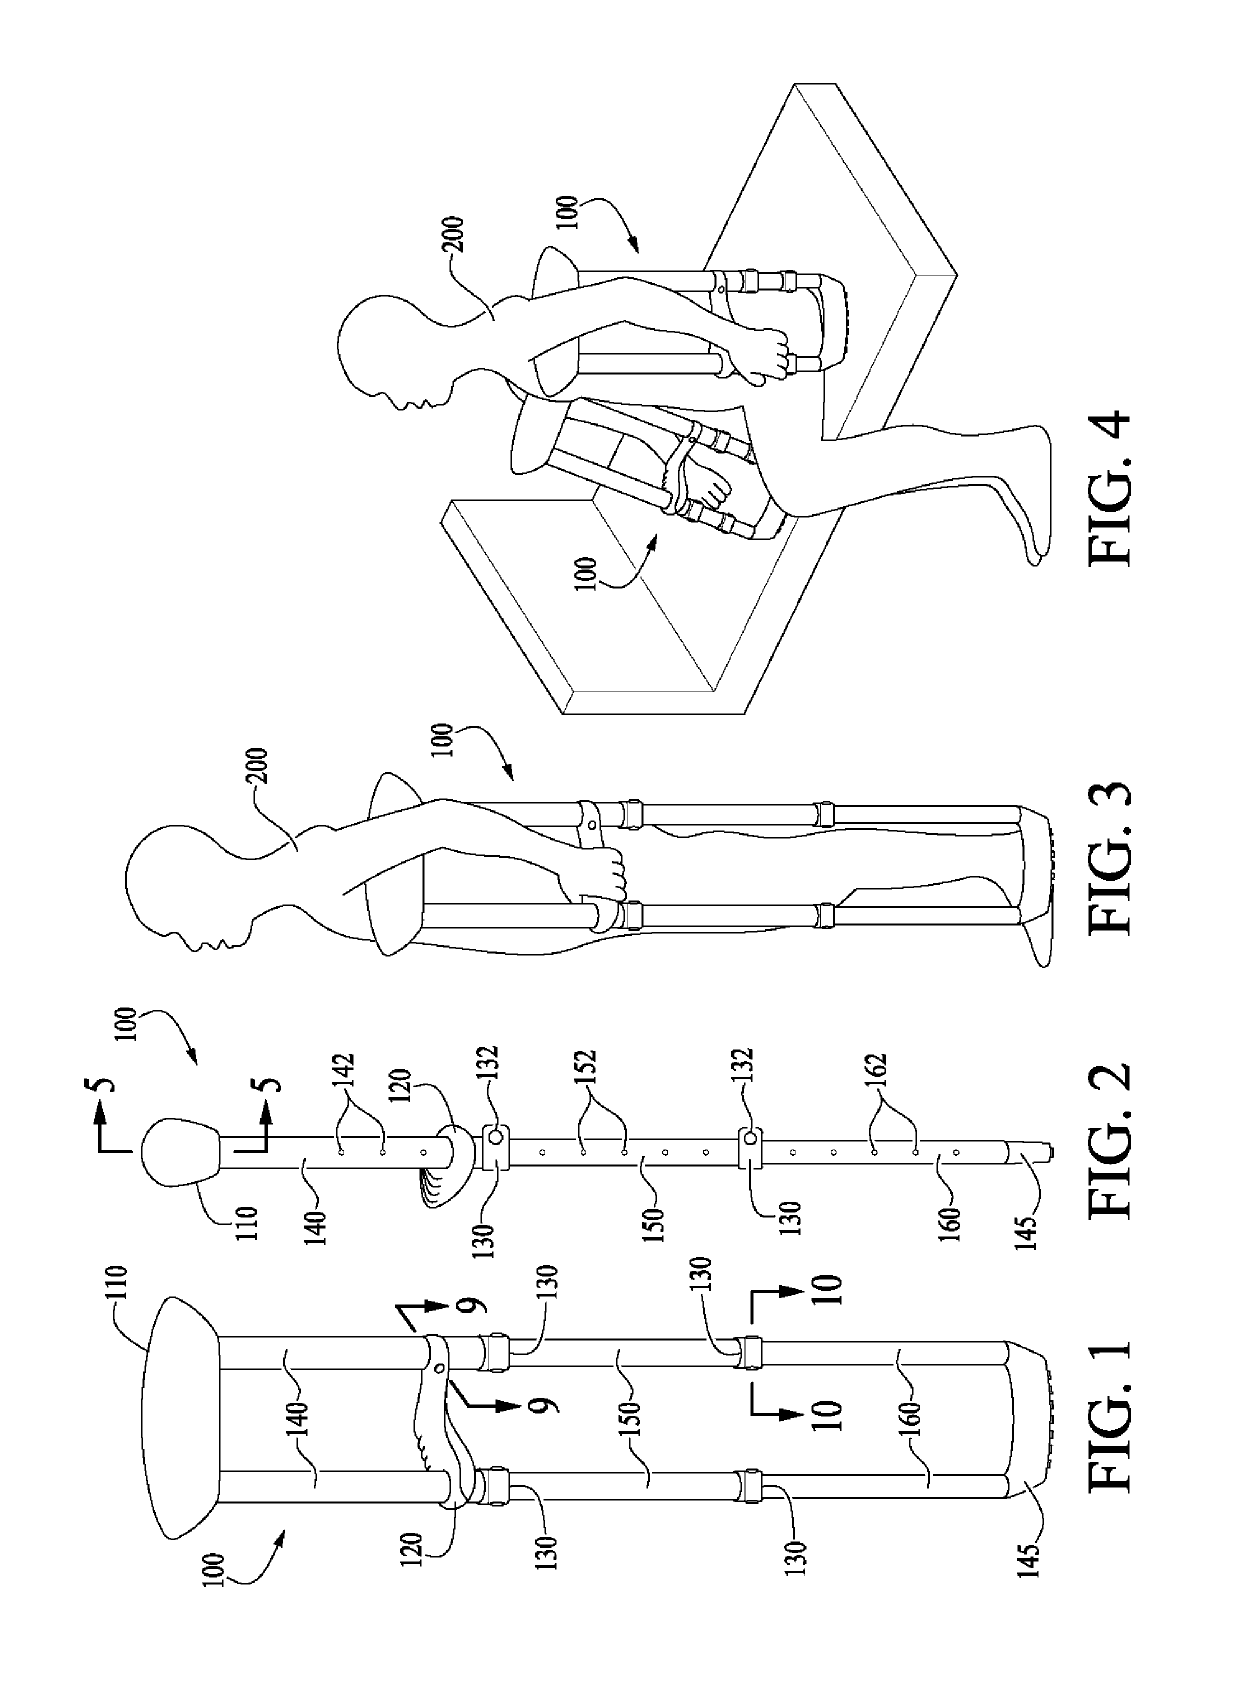 Crutch and sitting device